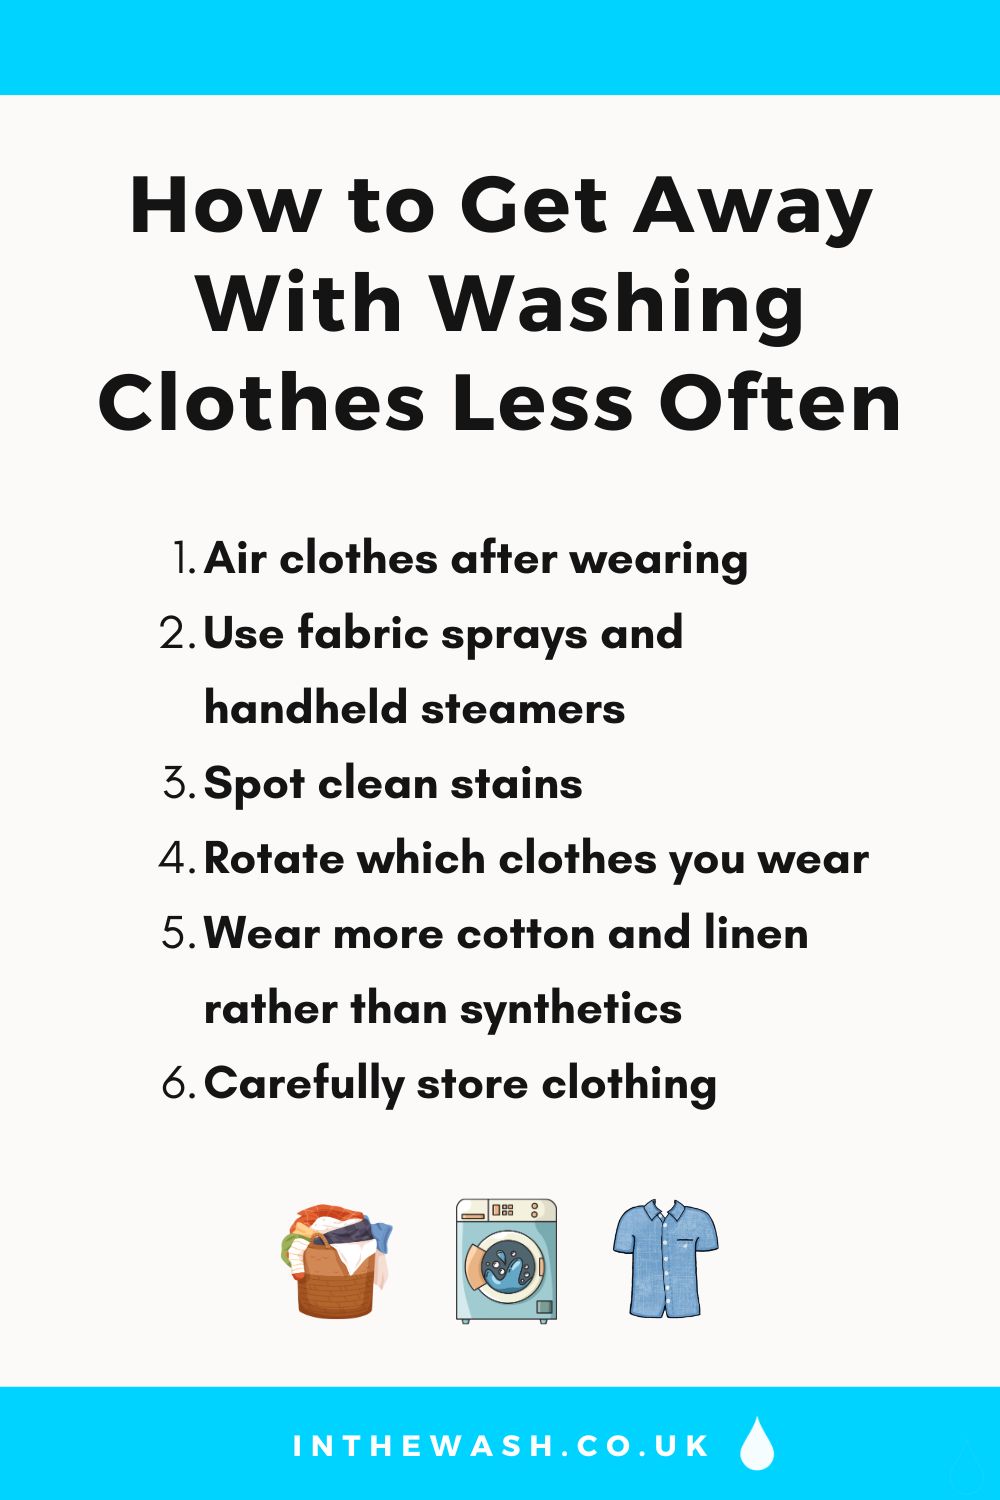 How to get away with washing clothes less often